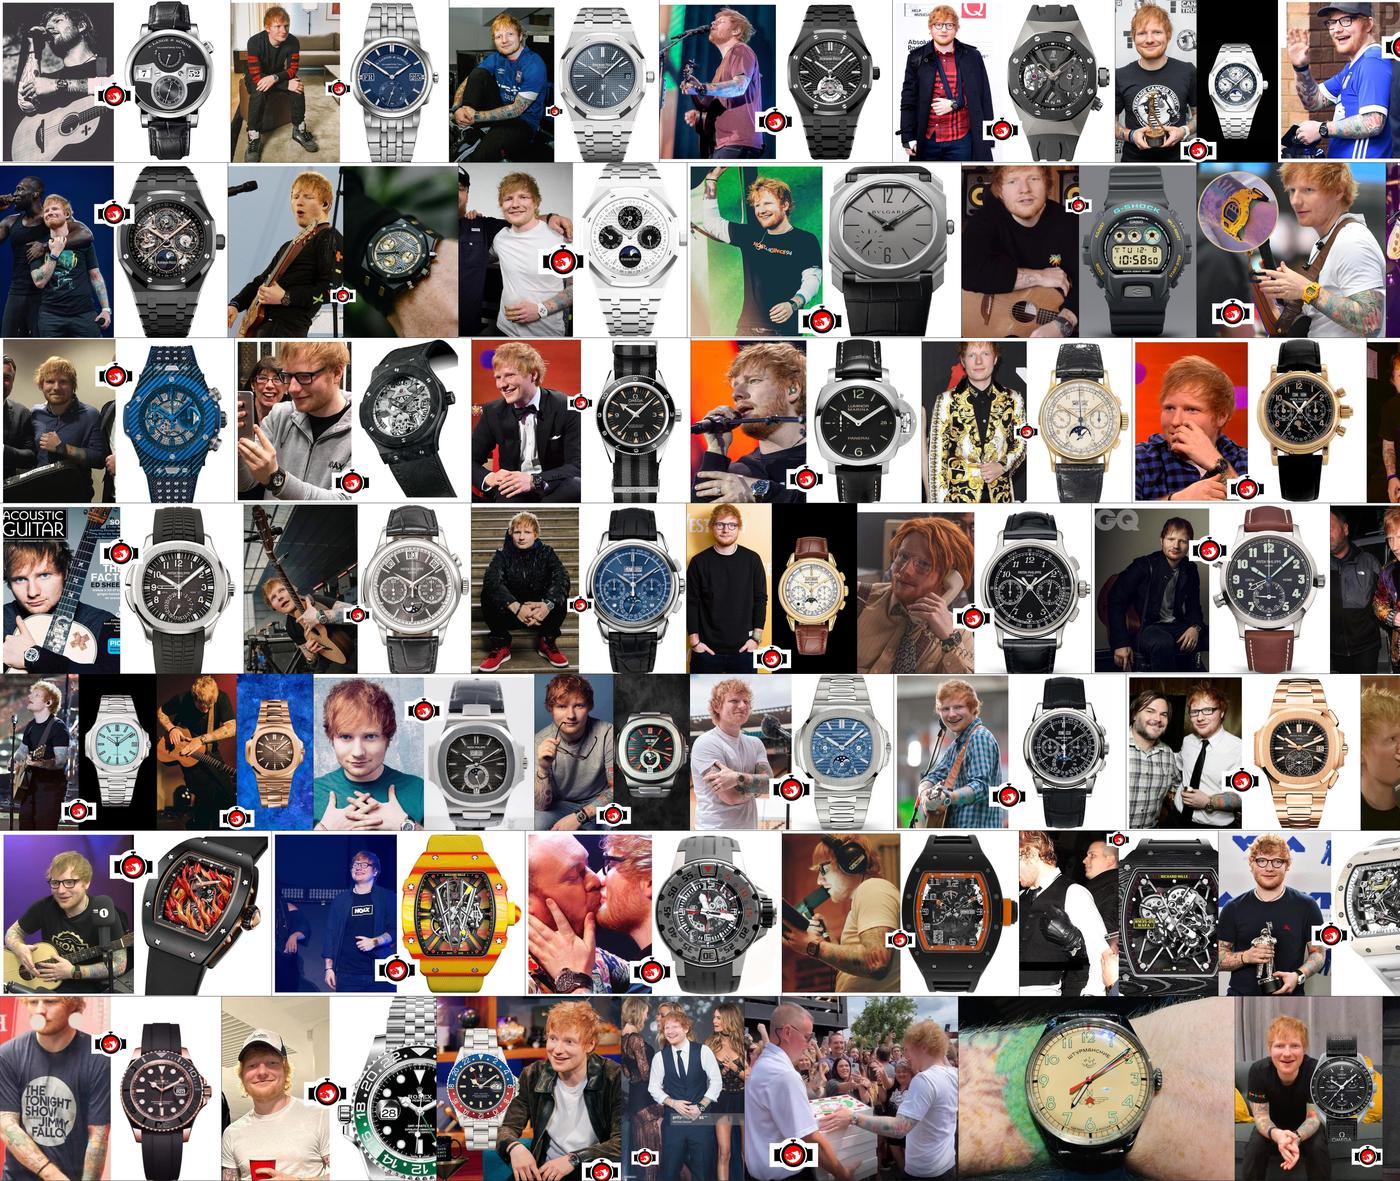 Ed Sheeran's Impressive Watch Collection: A Glimpse into His Timepiece Obsession